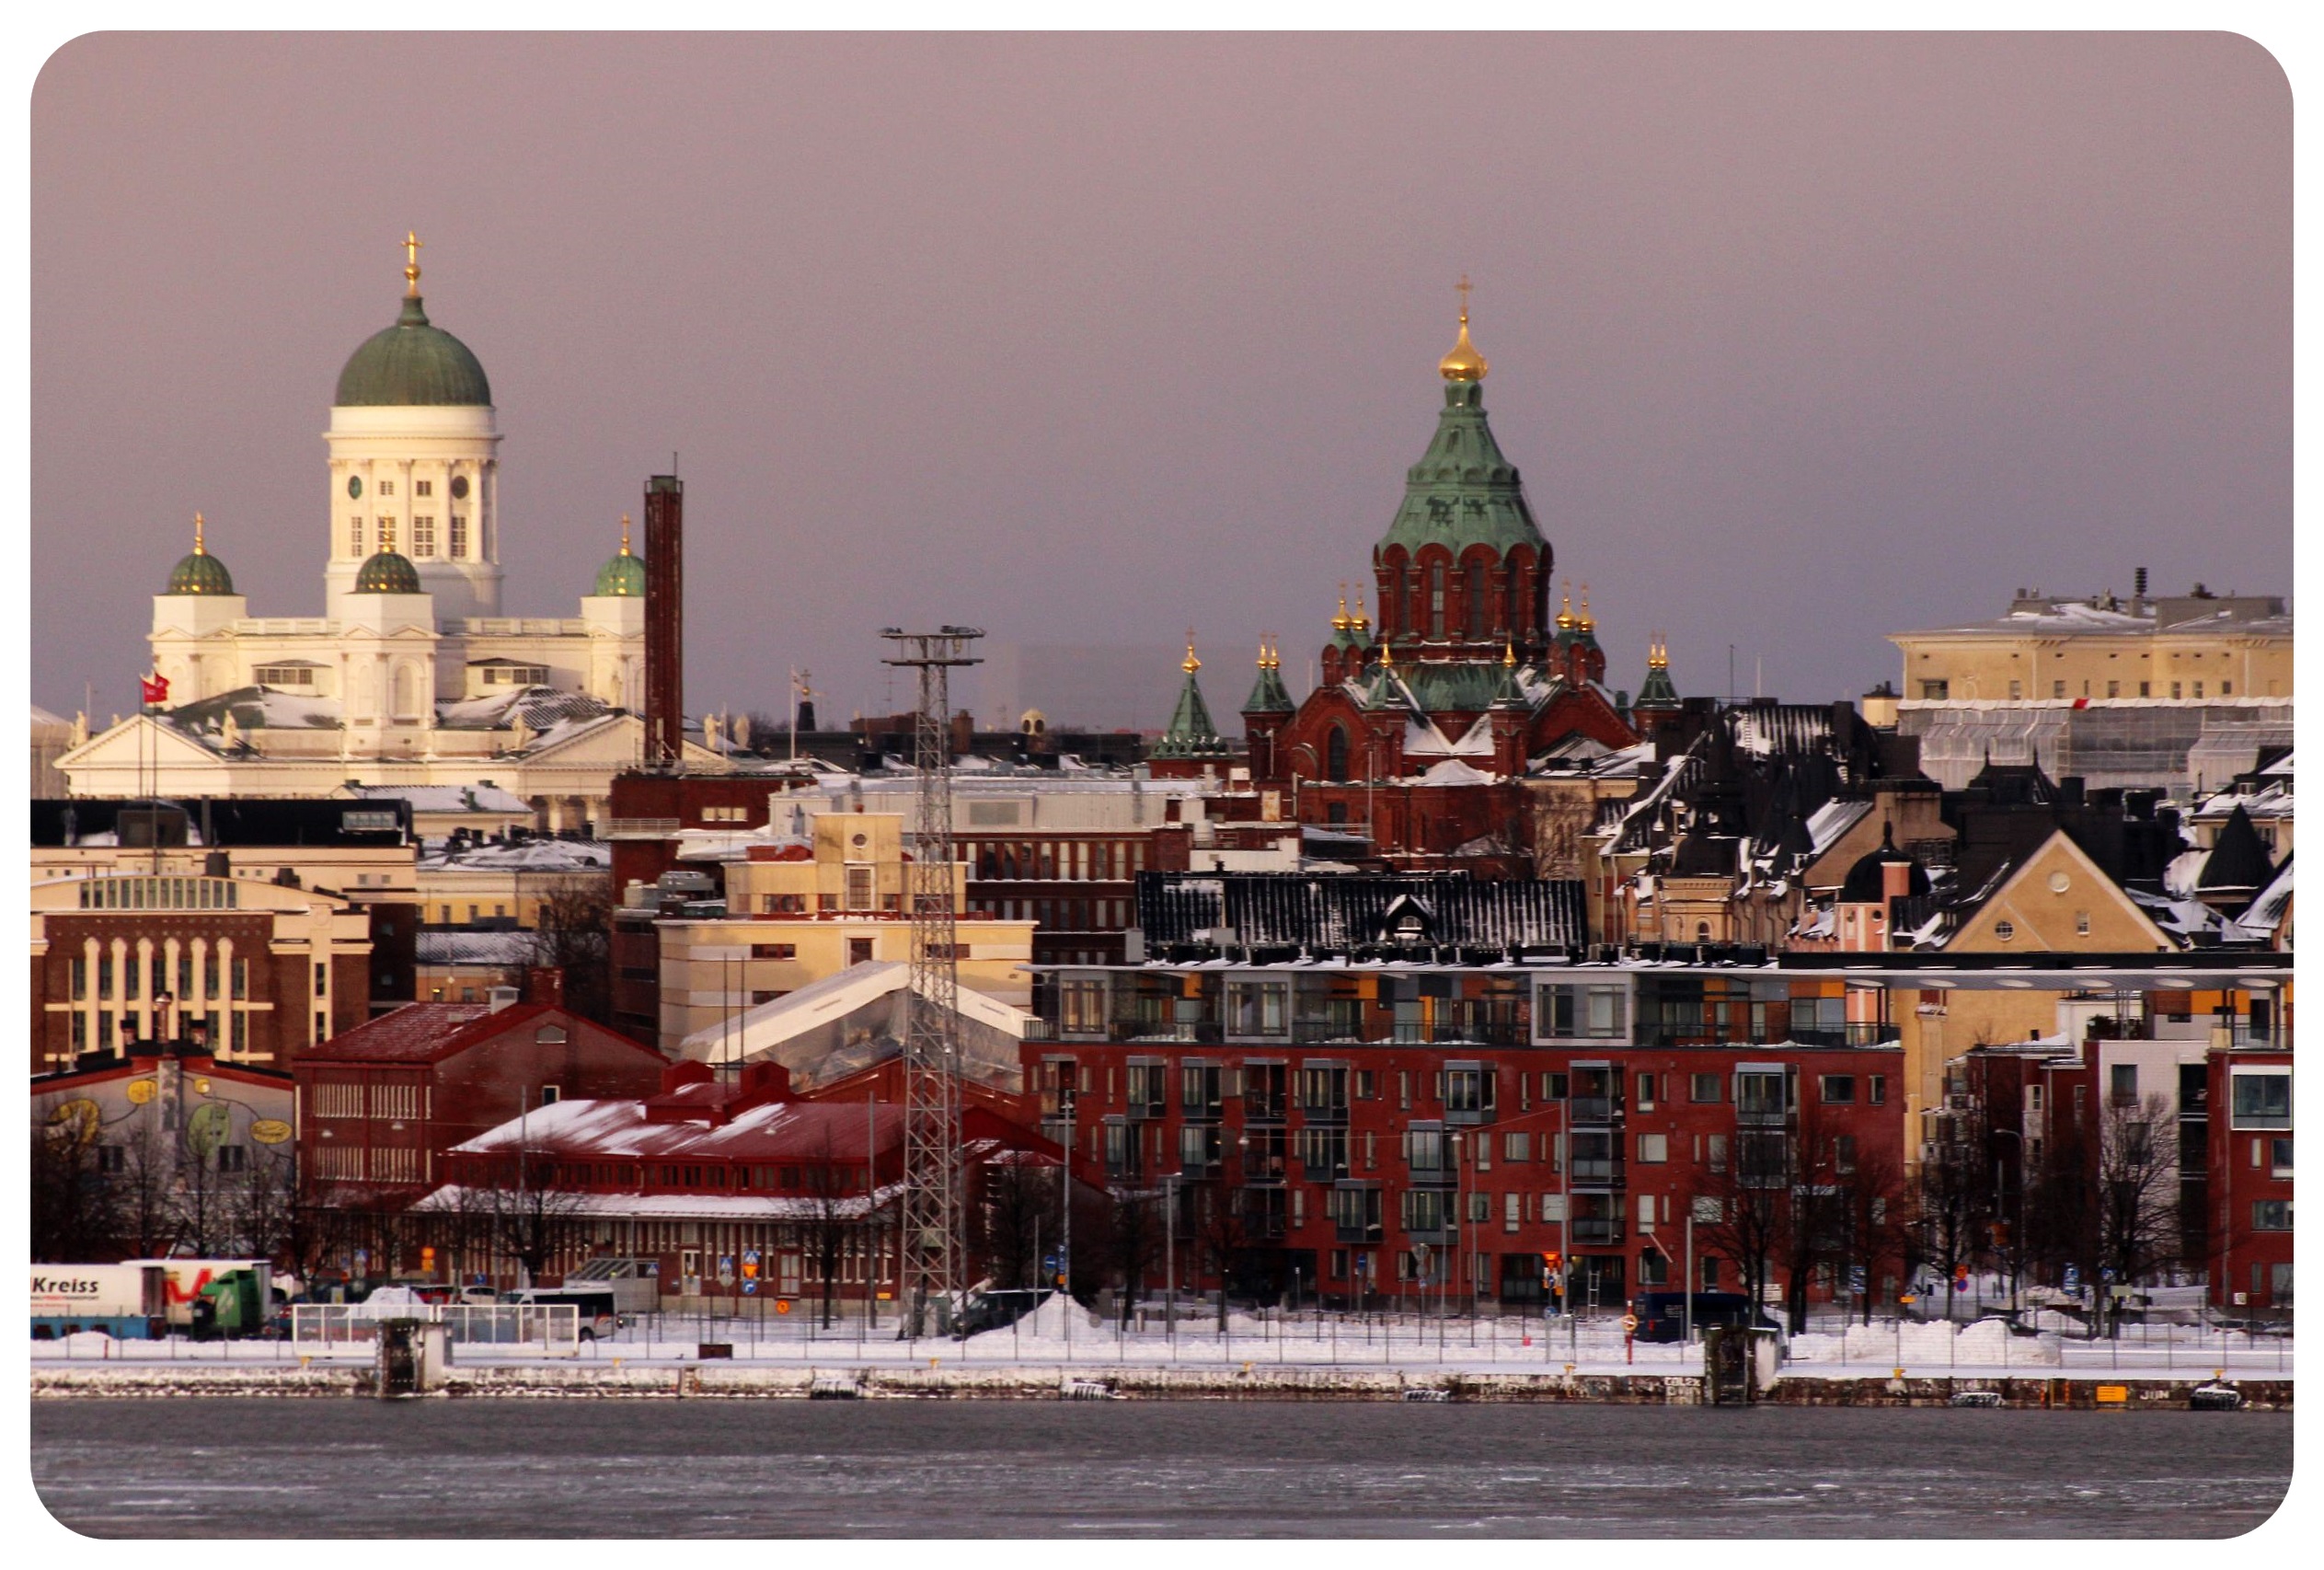 A first-timer’s guide to Helsinki